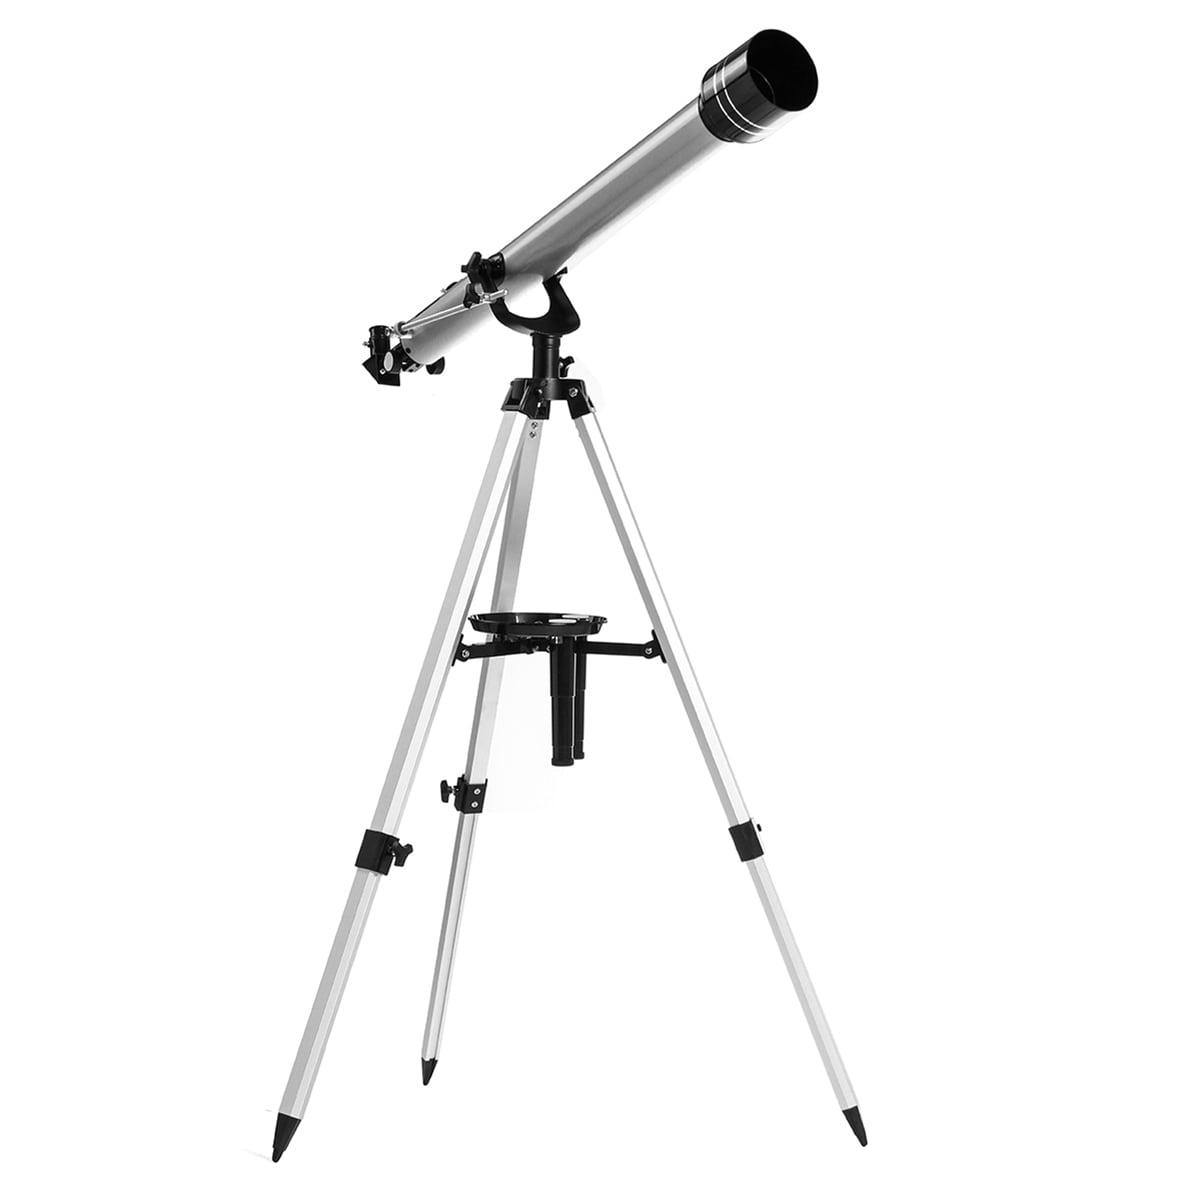 Phone Adapter Silver with Tripod Astronomical Telescope for Kids and Astronomy Beginners Shutter Remote 900mm/60mm Good Partner to View Landscape and Planet 